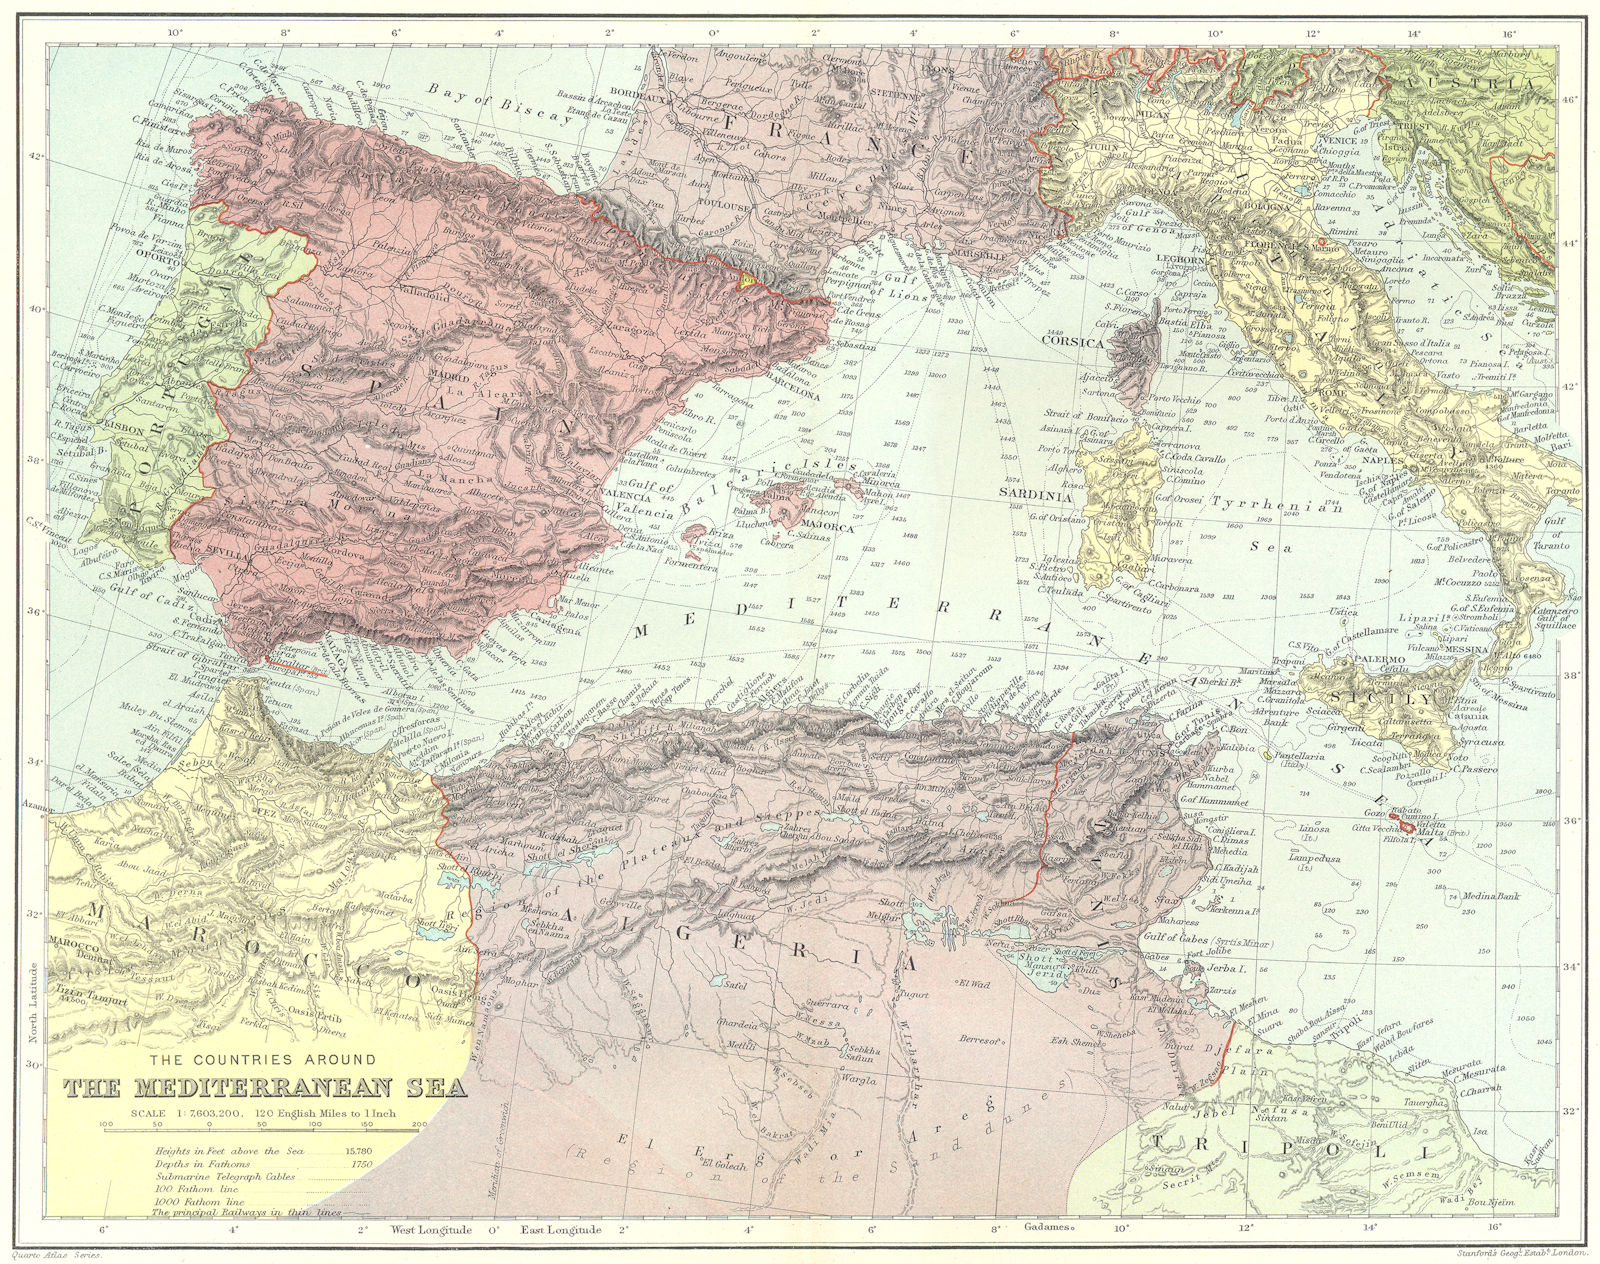 WESTERN MEDITERRANEAN. submarine cables.Iberia N Africa Italy.STANFORD 1906 map